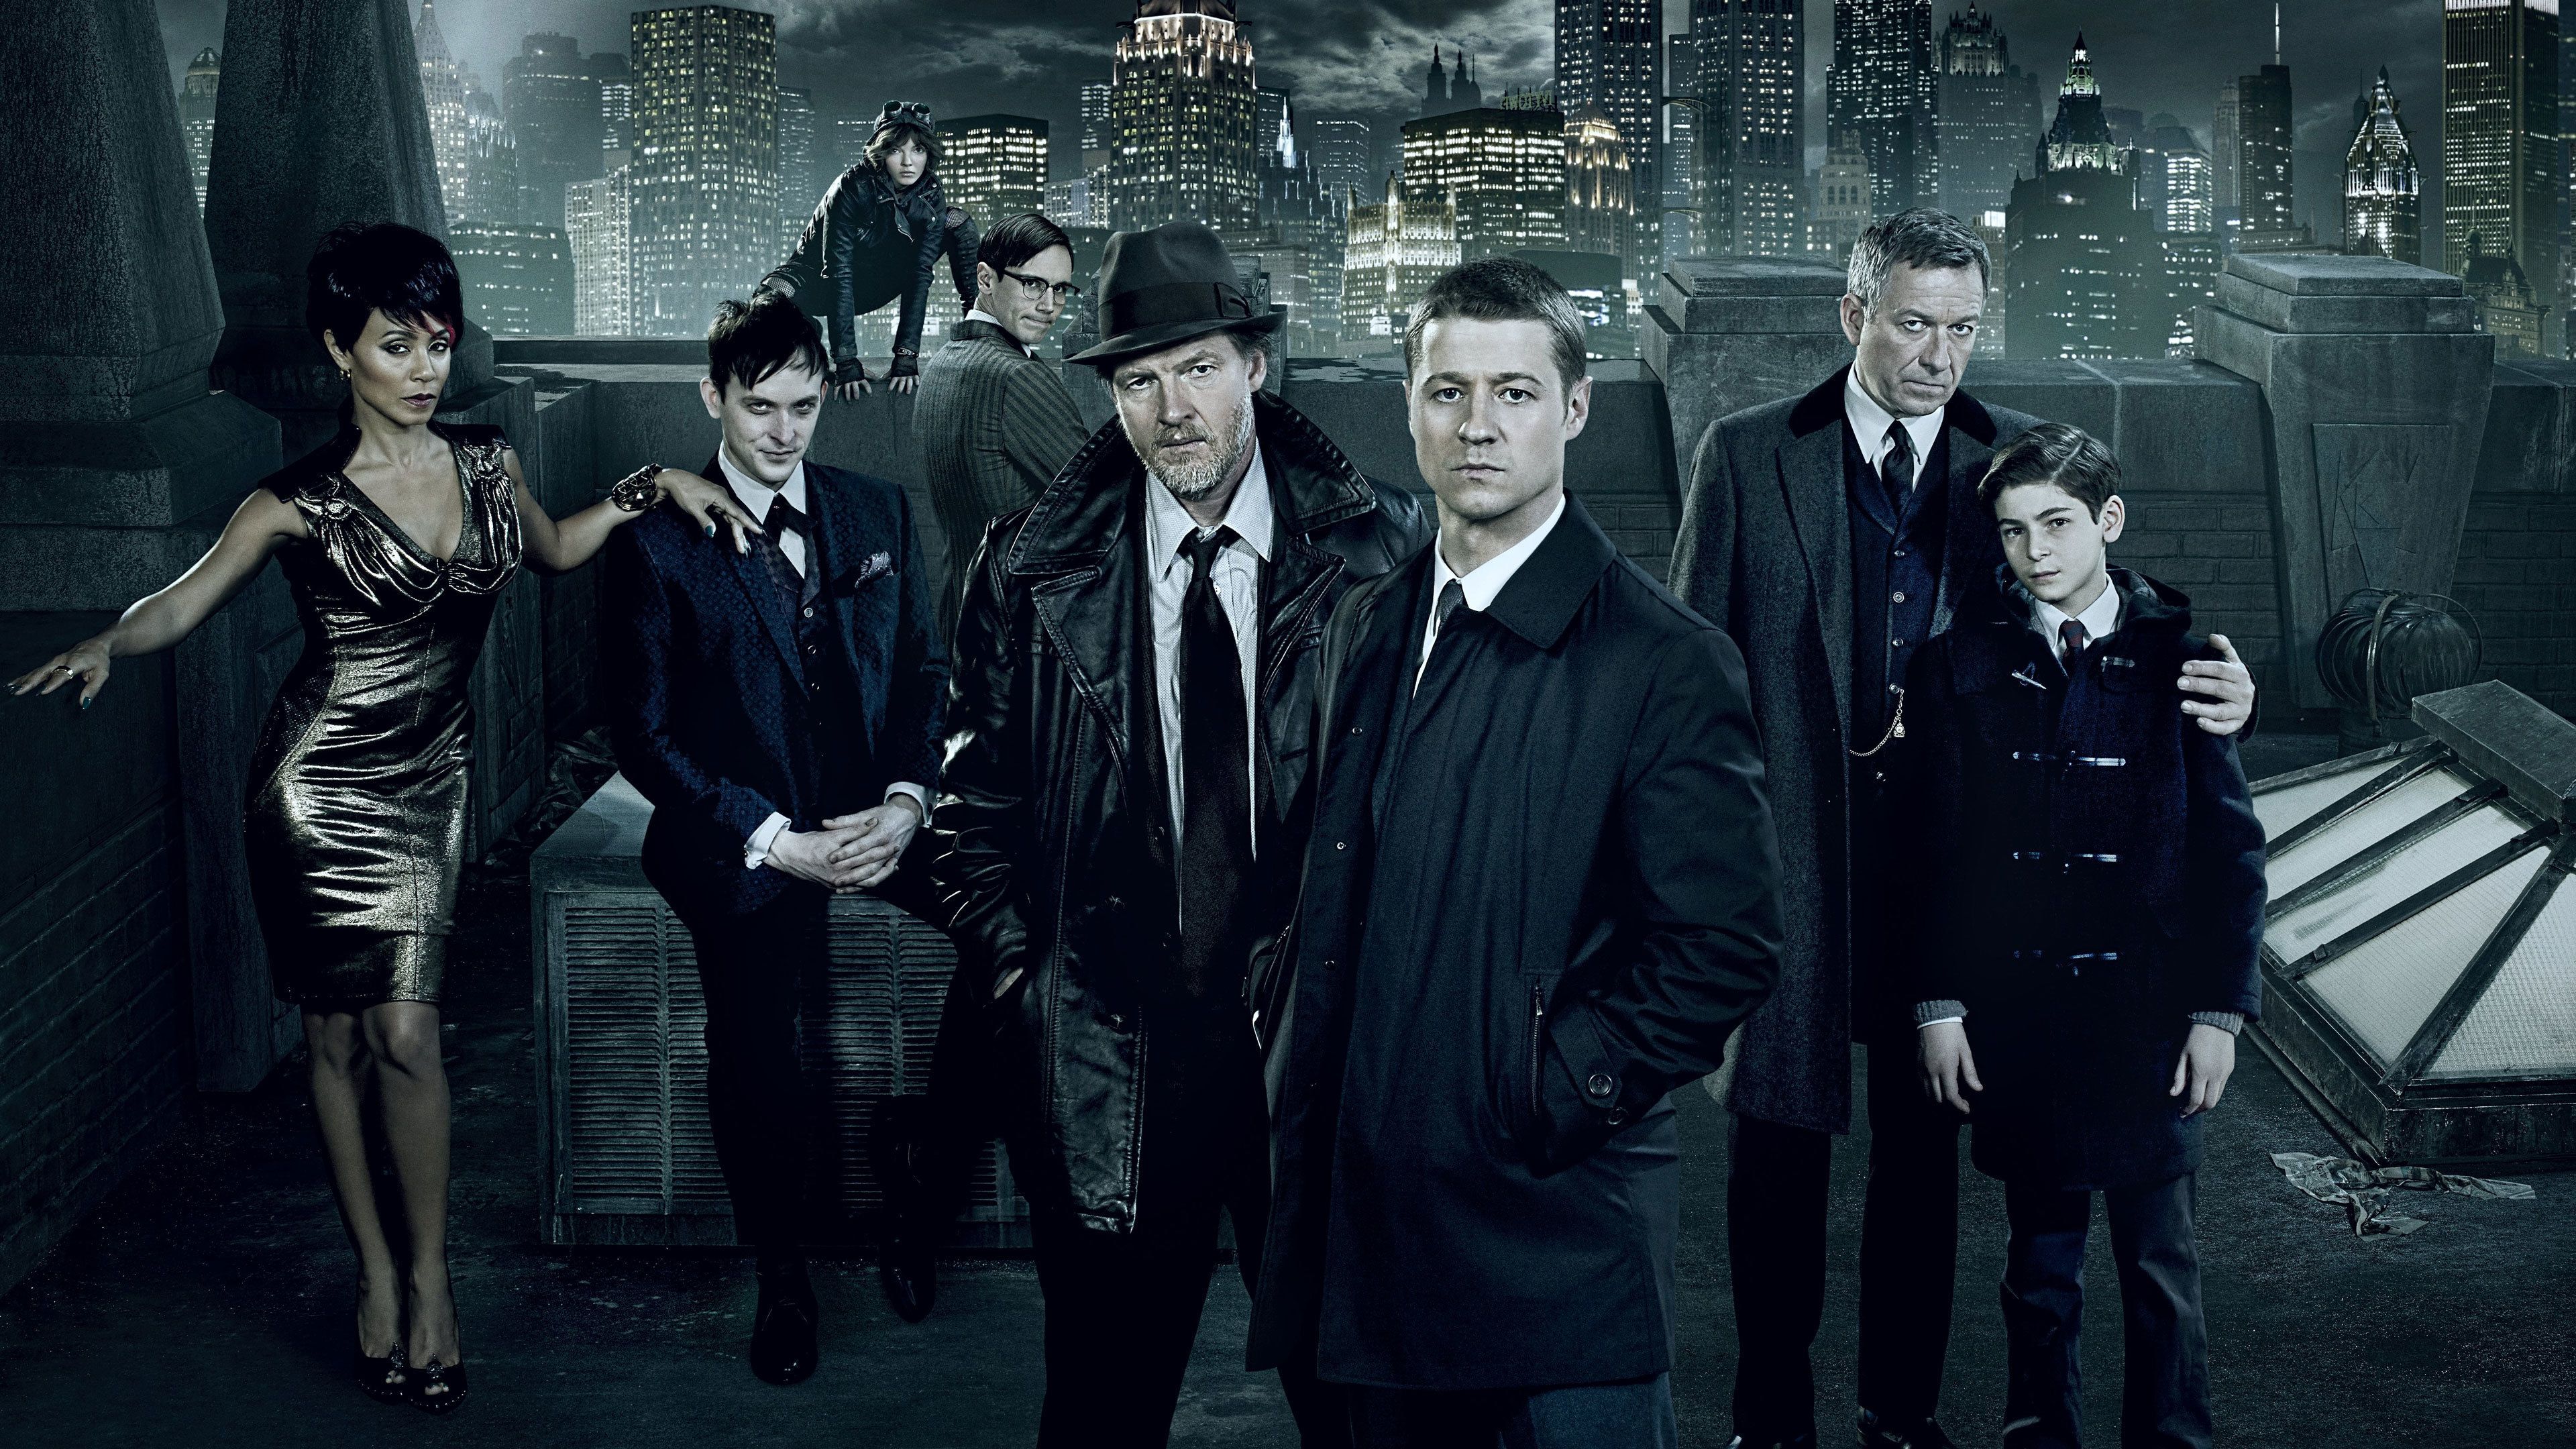 Gotham HD Wallpaper and Background Image